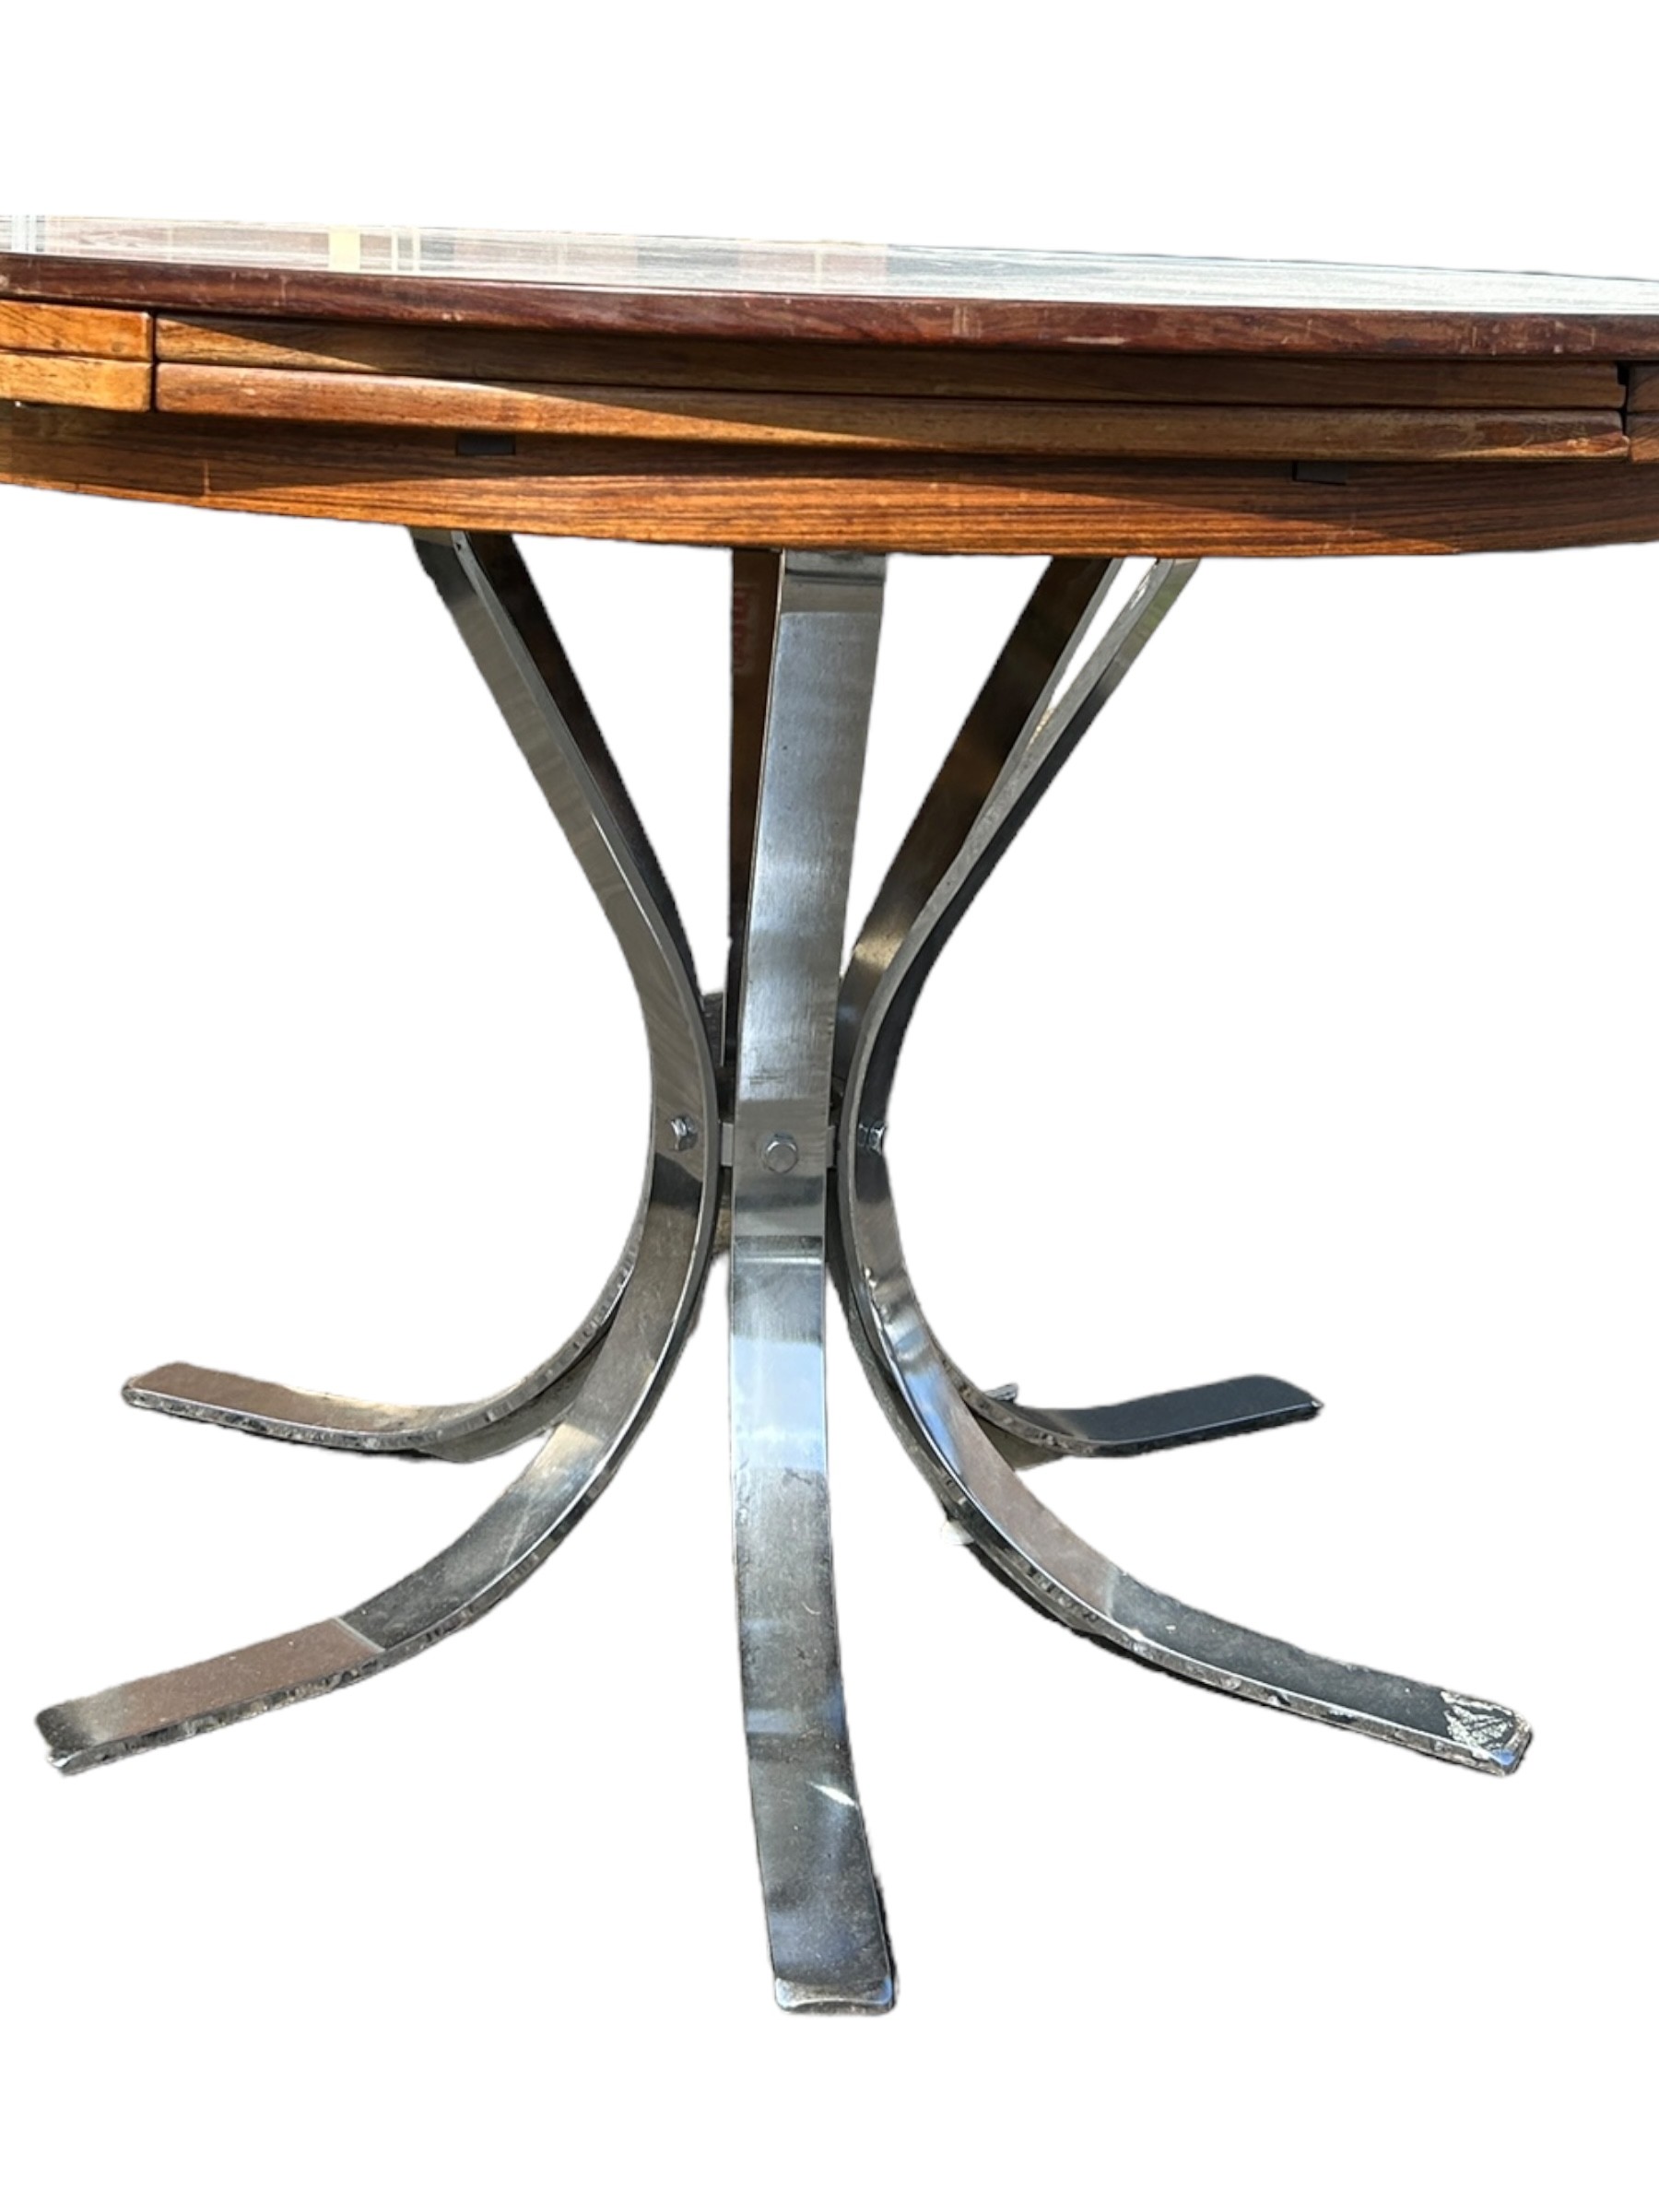 ORIGINAL EXTENDING 1960'S DANISH DINING TABLE BY DRYLUND ON CHROME BASE, Original label and stamps. - Image 5 of 11